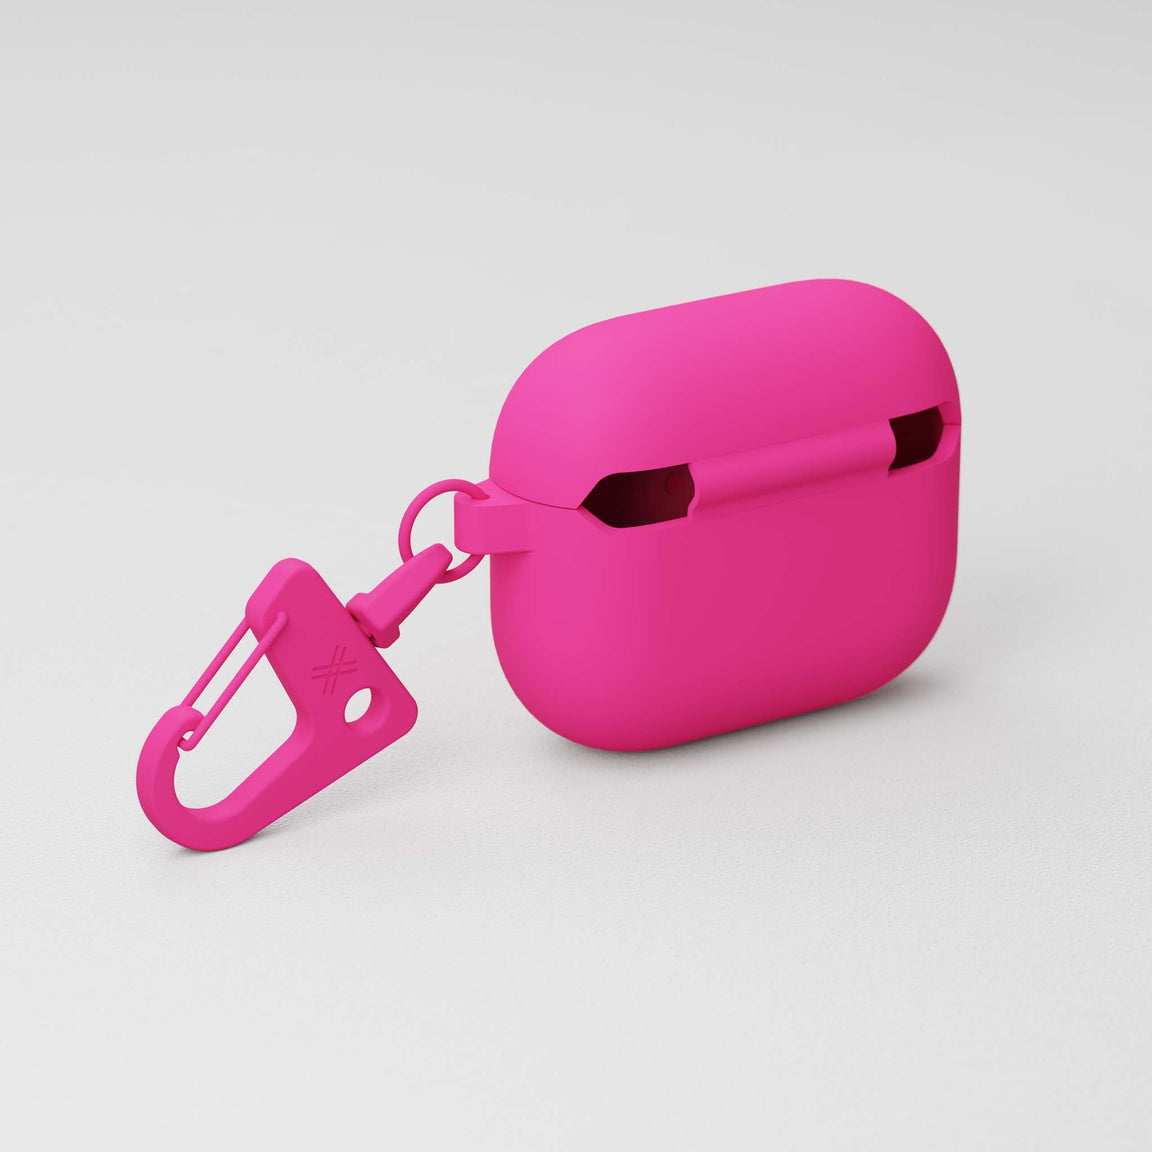 Apple AirPods 3rd generation case in Pink with soft-touch finish and carabiner | XOUXOU